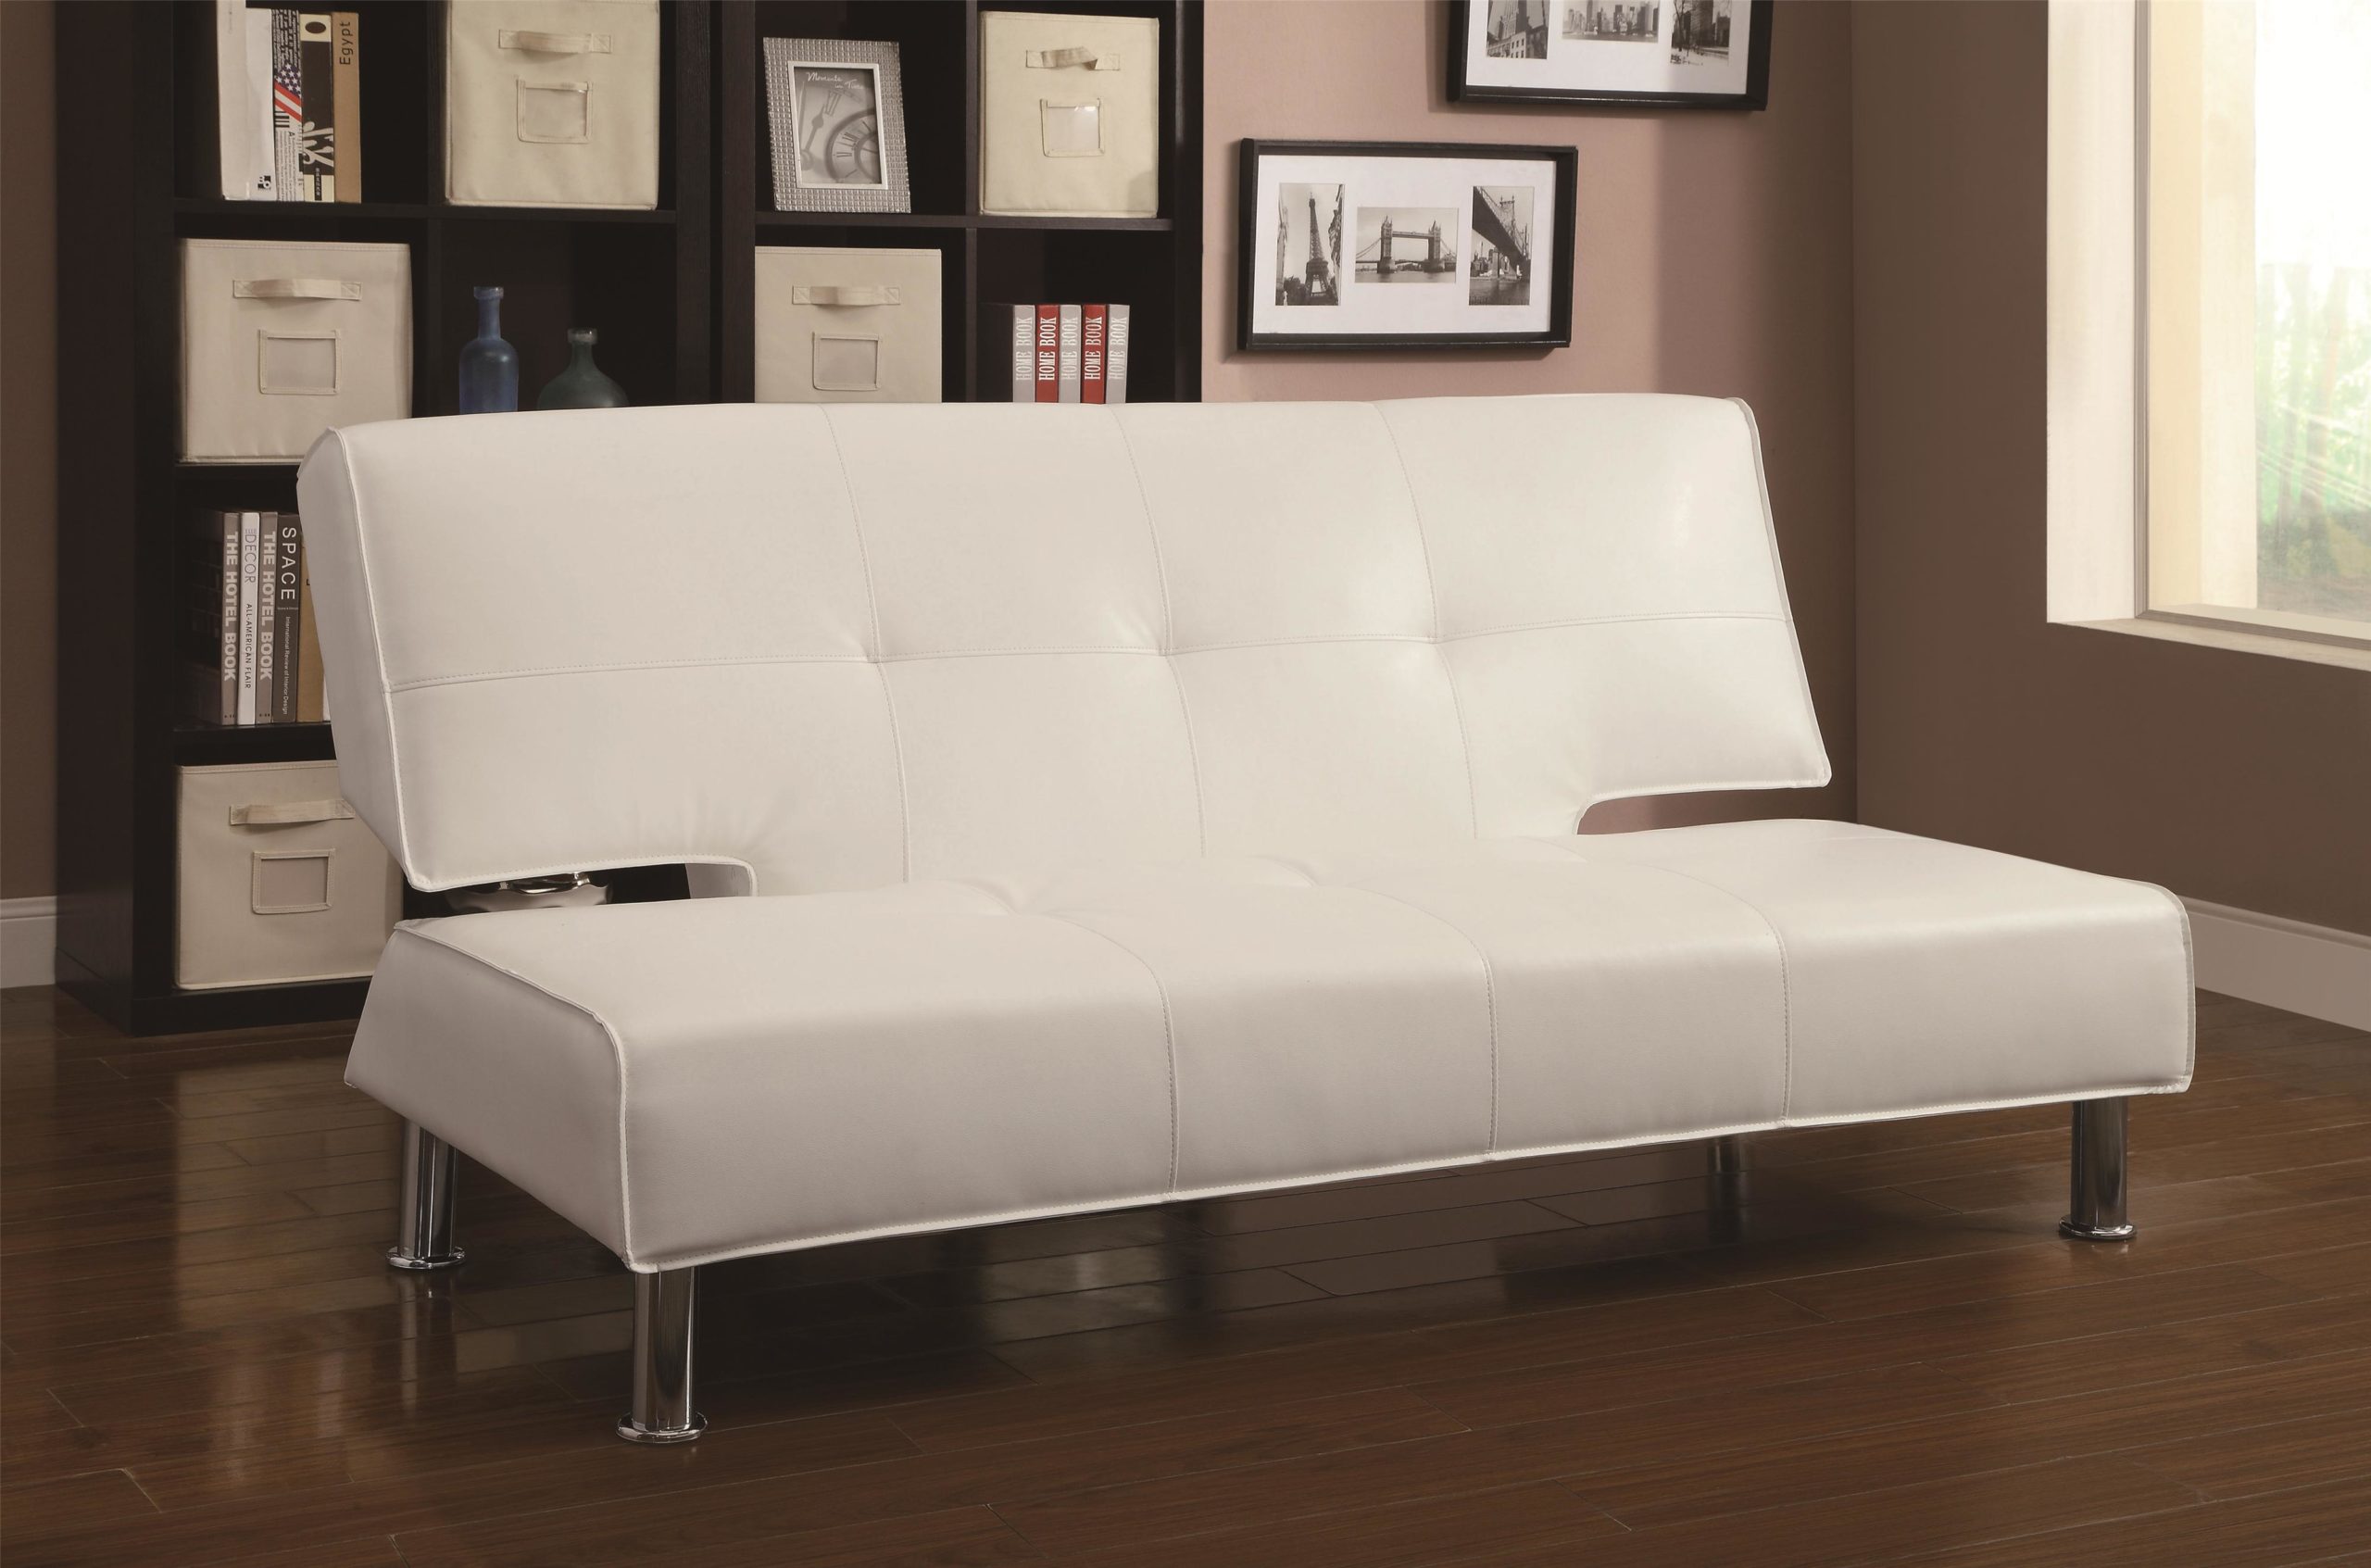 White Adjustable Armless Sofa Bed with chrome legs in up position. Covered in a silky smooth white leather-like vinyl, this contemporary sofa bed is the perfect place to lounge during the day and accommodate guests at night. The convertible sofa features clean lines, modern chrome legs, and a subtly shaped back for a pop of contemporary style. Tufted seating and welt cords complete the modern vibe. A sturdy wooden frame provides support and durability, while plush padding offers lasting sleep-worthy comfort. When flat, adjustable sofa is: 72″W x 48.5″D x 16″H Collection Description Make the most of your valuable space with a convenient and stylish sofa bed. Available in many styles and colors to complement your decor, these multi-functional pieces offer comfortable lounging space by day, and a cozy bed for overnight guests. Great for small homes, apartments, condos, and dorms, a convertible sofa is just what you need to take advantage of your space, without sacrificing style. Product Details Item & Dimensions Manufacturer Coaster Length (side to side) 72″ L Height (bottom to top) 35″ H Width (front to back) 38″ W Seat Depth 22″ Fabric & Upholstery Fabric Options Available in Upholstery Option/s Shown